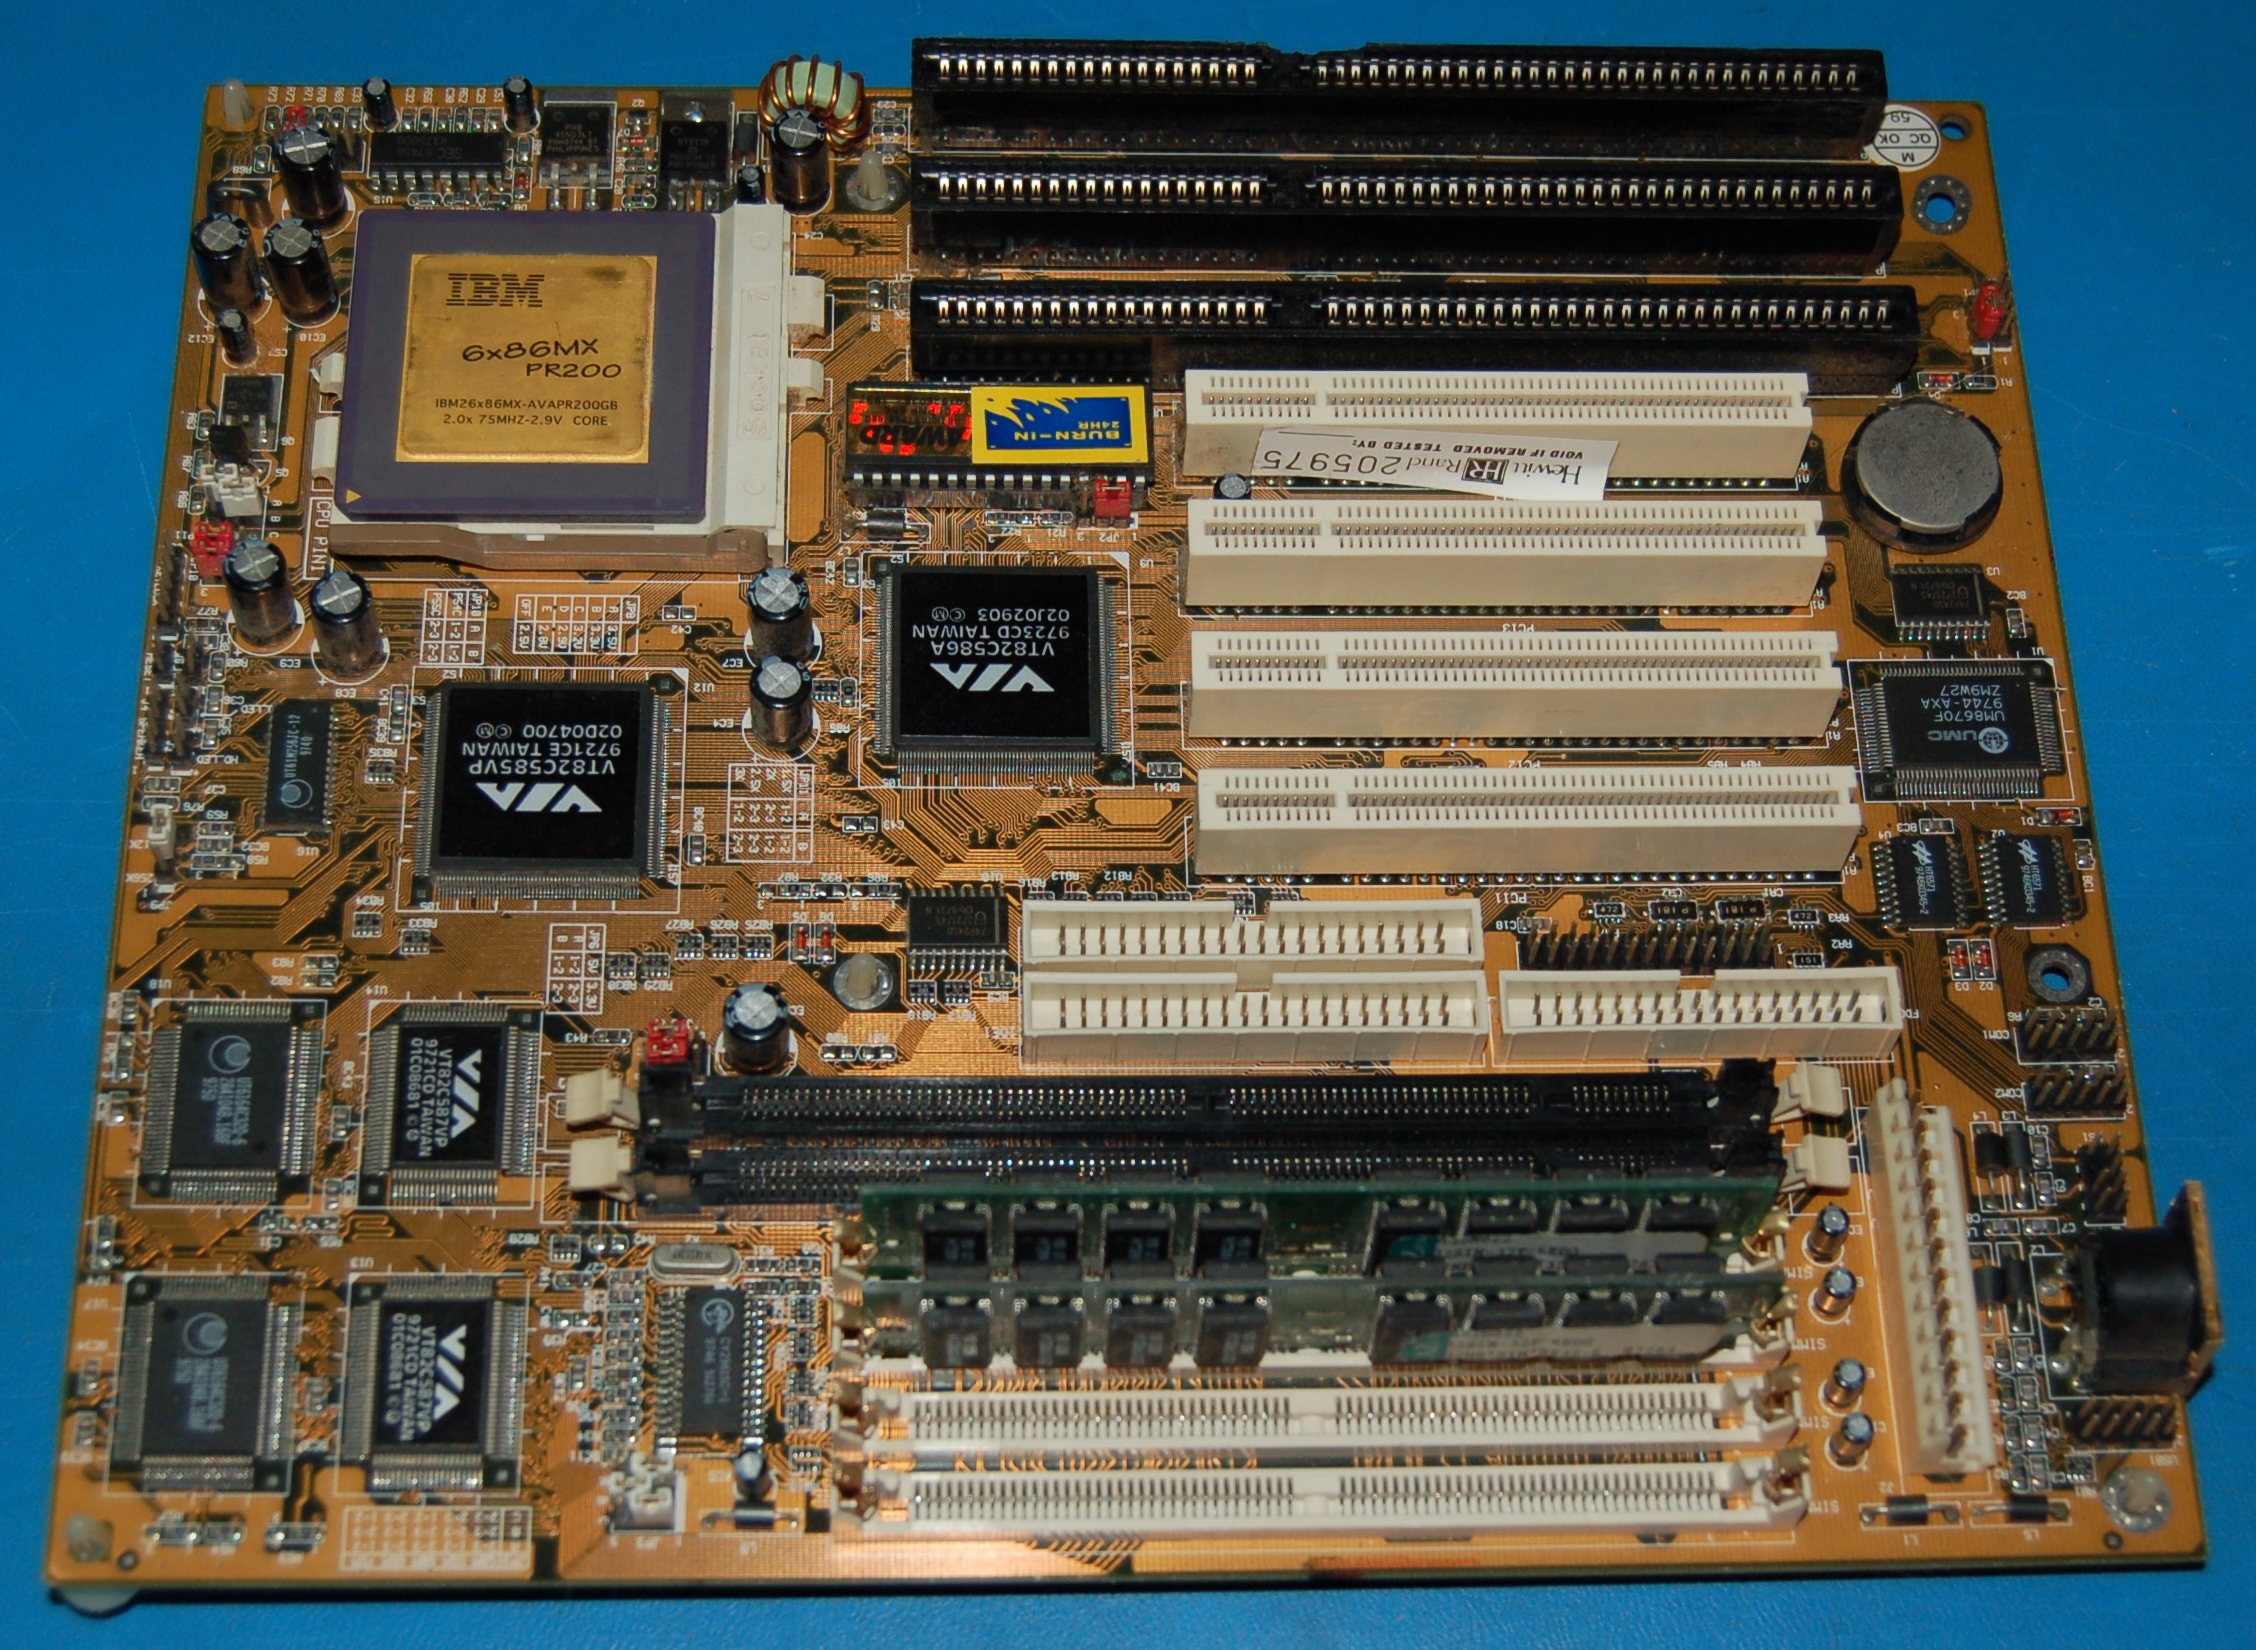 Vintage Socket-7 x86 Motherboard with IBM 6x86MX-PR200 CPU & RAM - Click Image to Close